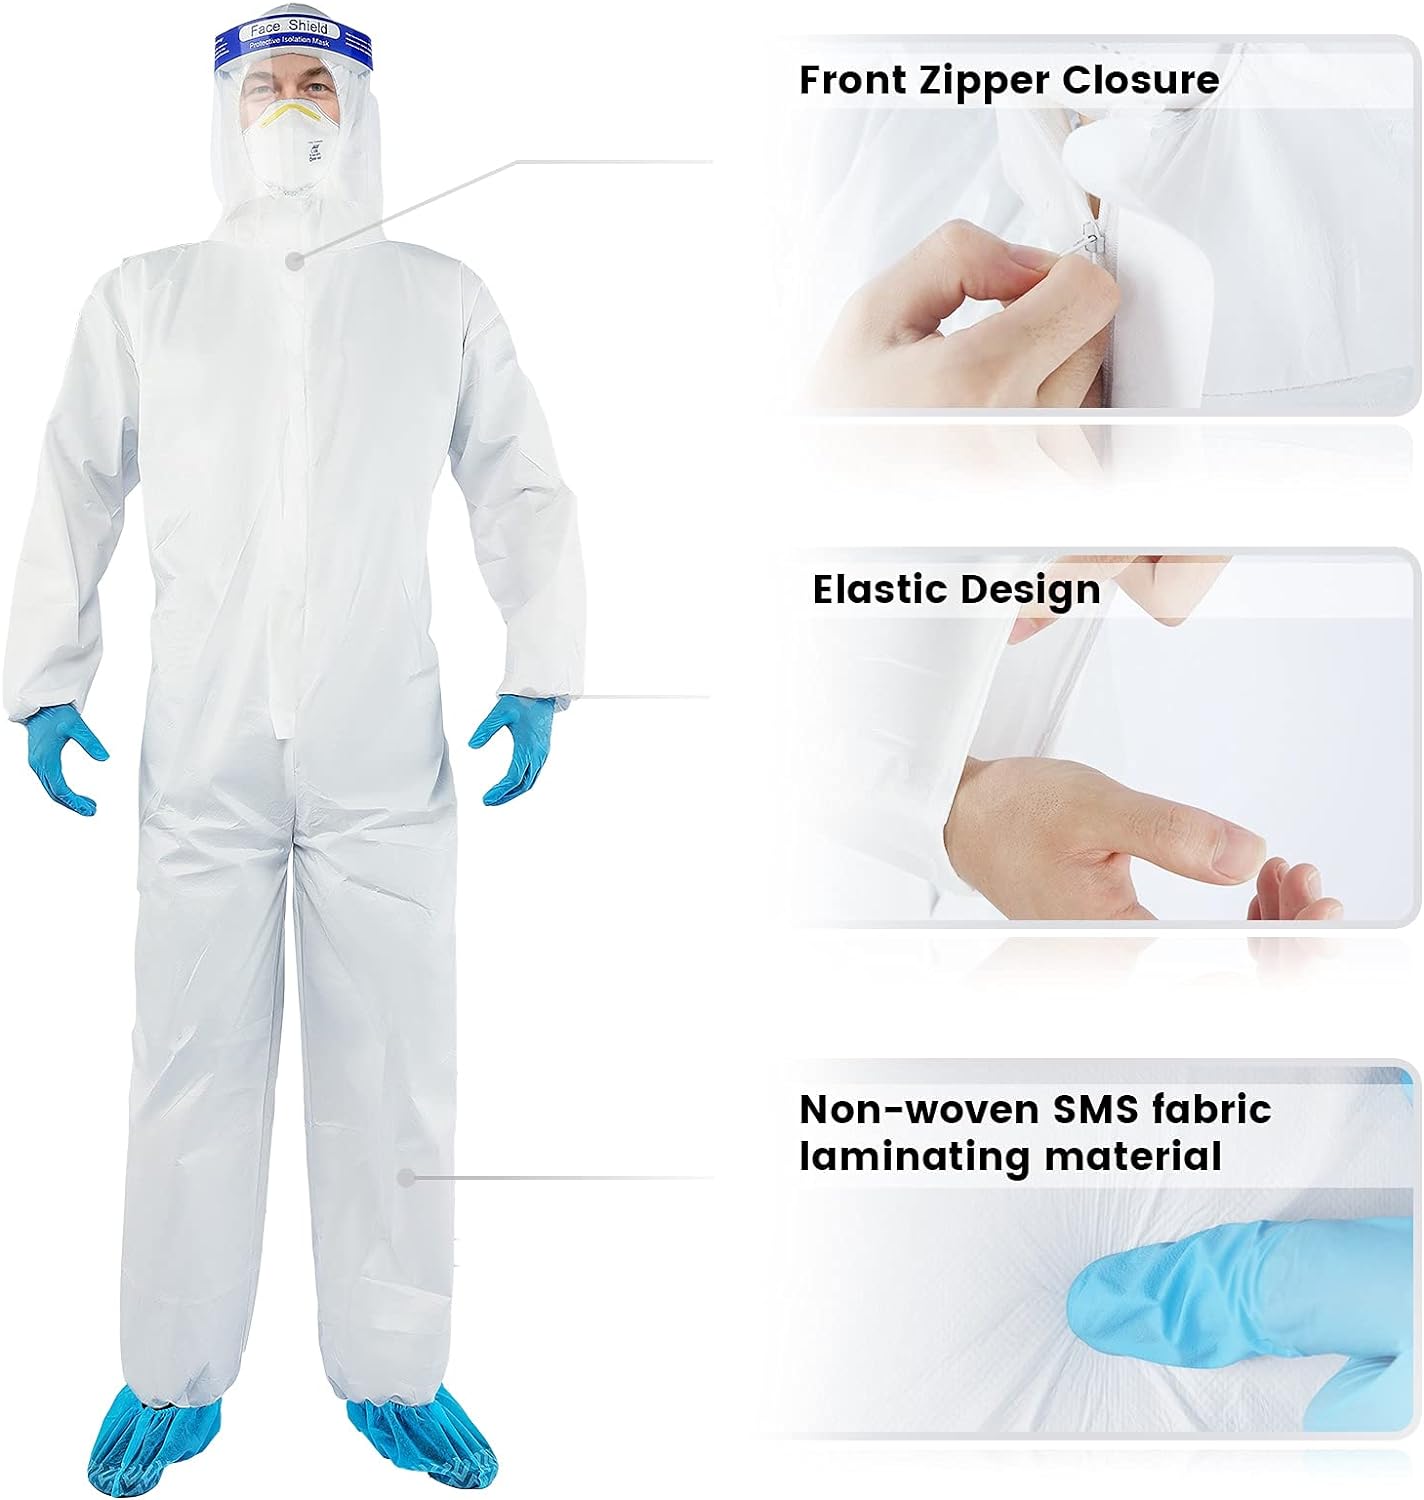 Generic YIBER Disposable Protective Coverall Hazmat Suit, Heavy Duty Painters Coveralls, Made of SF Material, Excellent air permeabilit